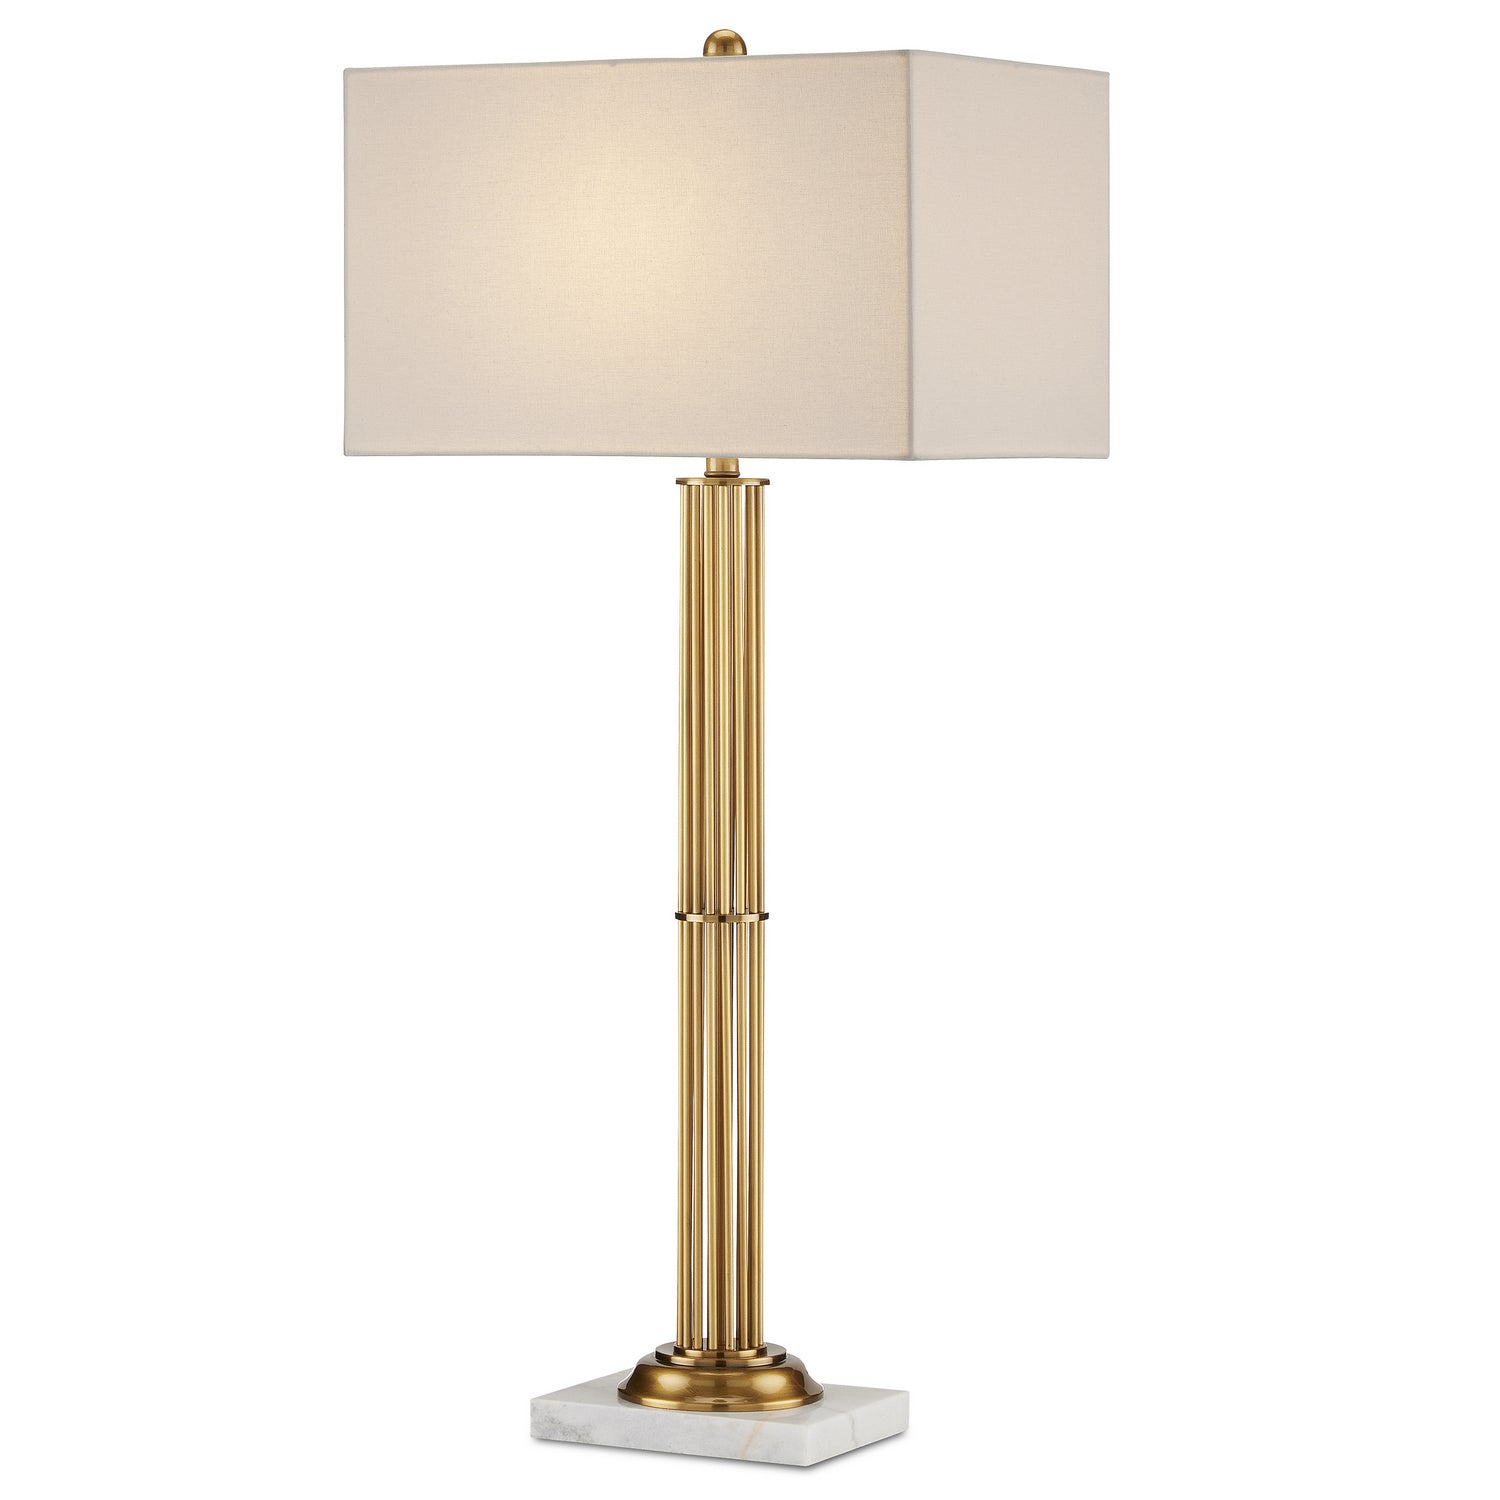 One Light Table Lamp from the Allegory collection in Antique Brass/White Marble finish